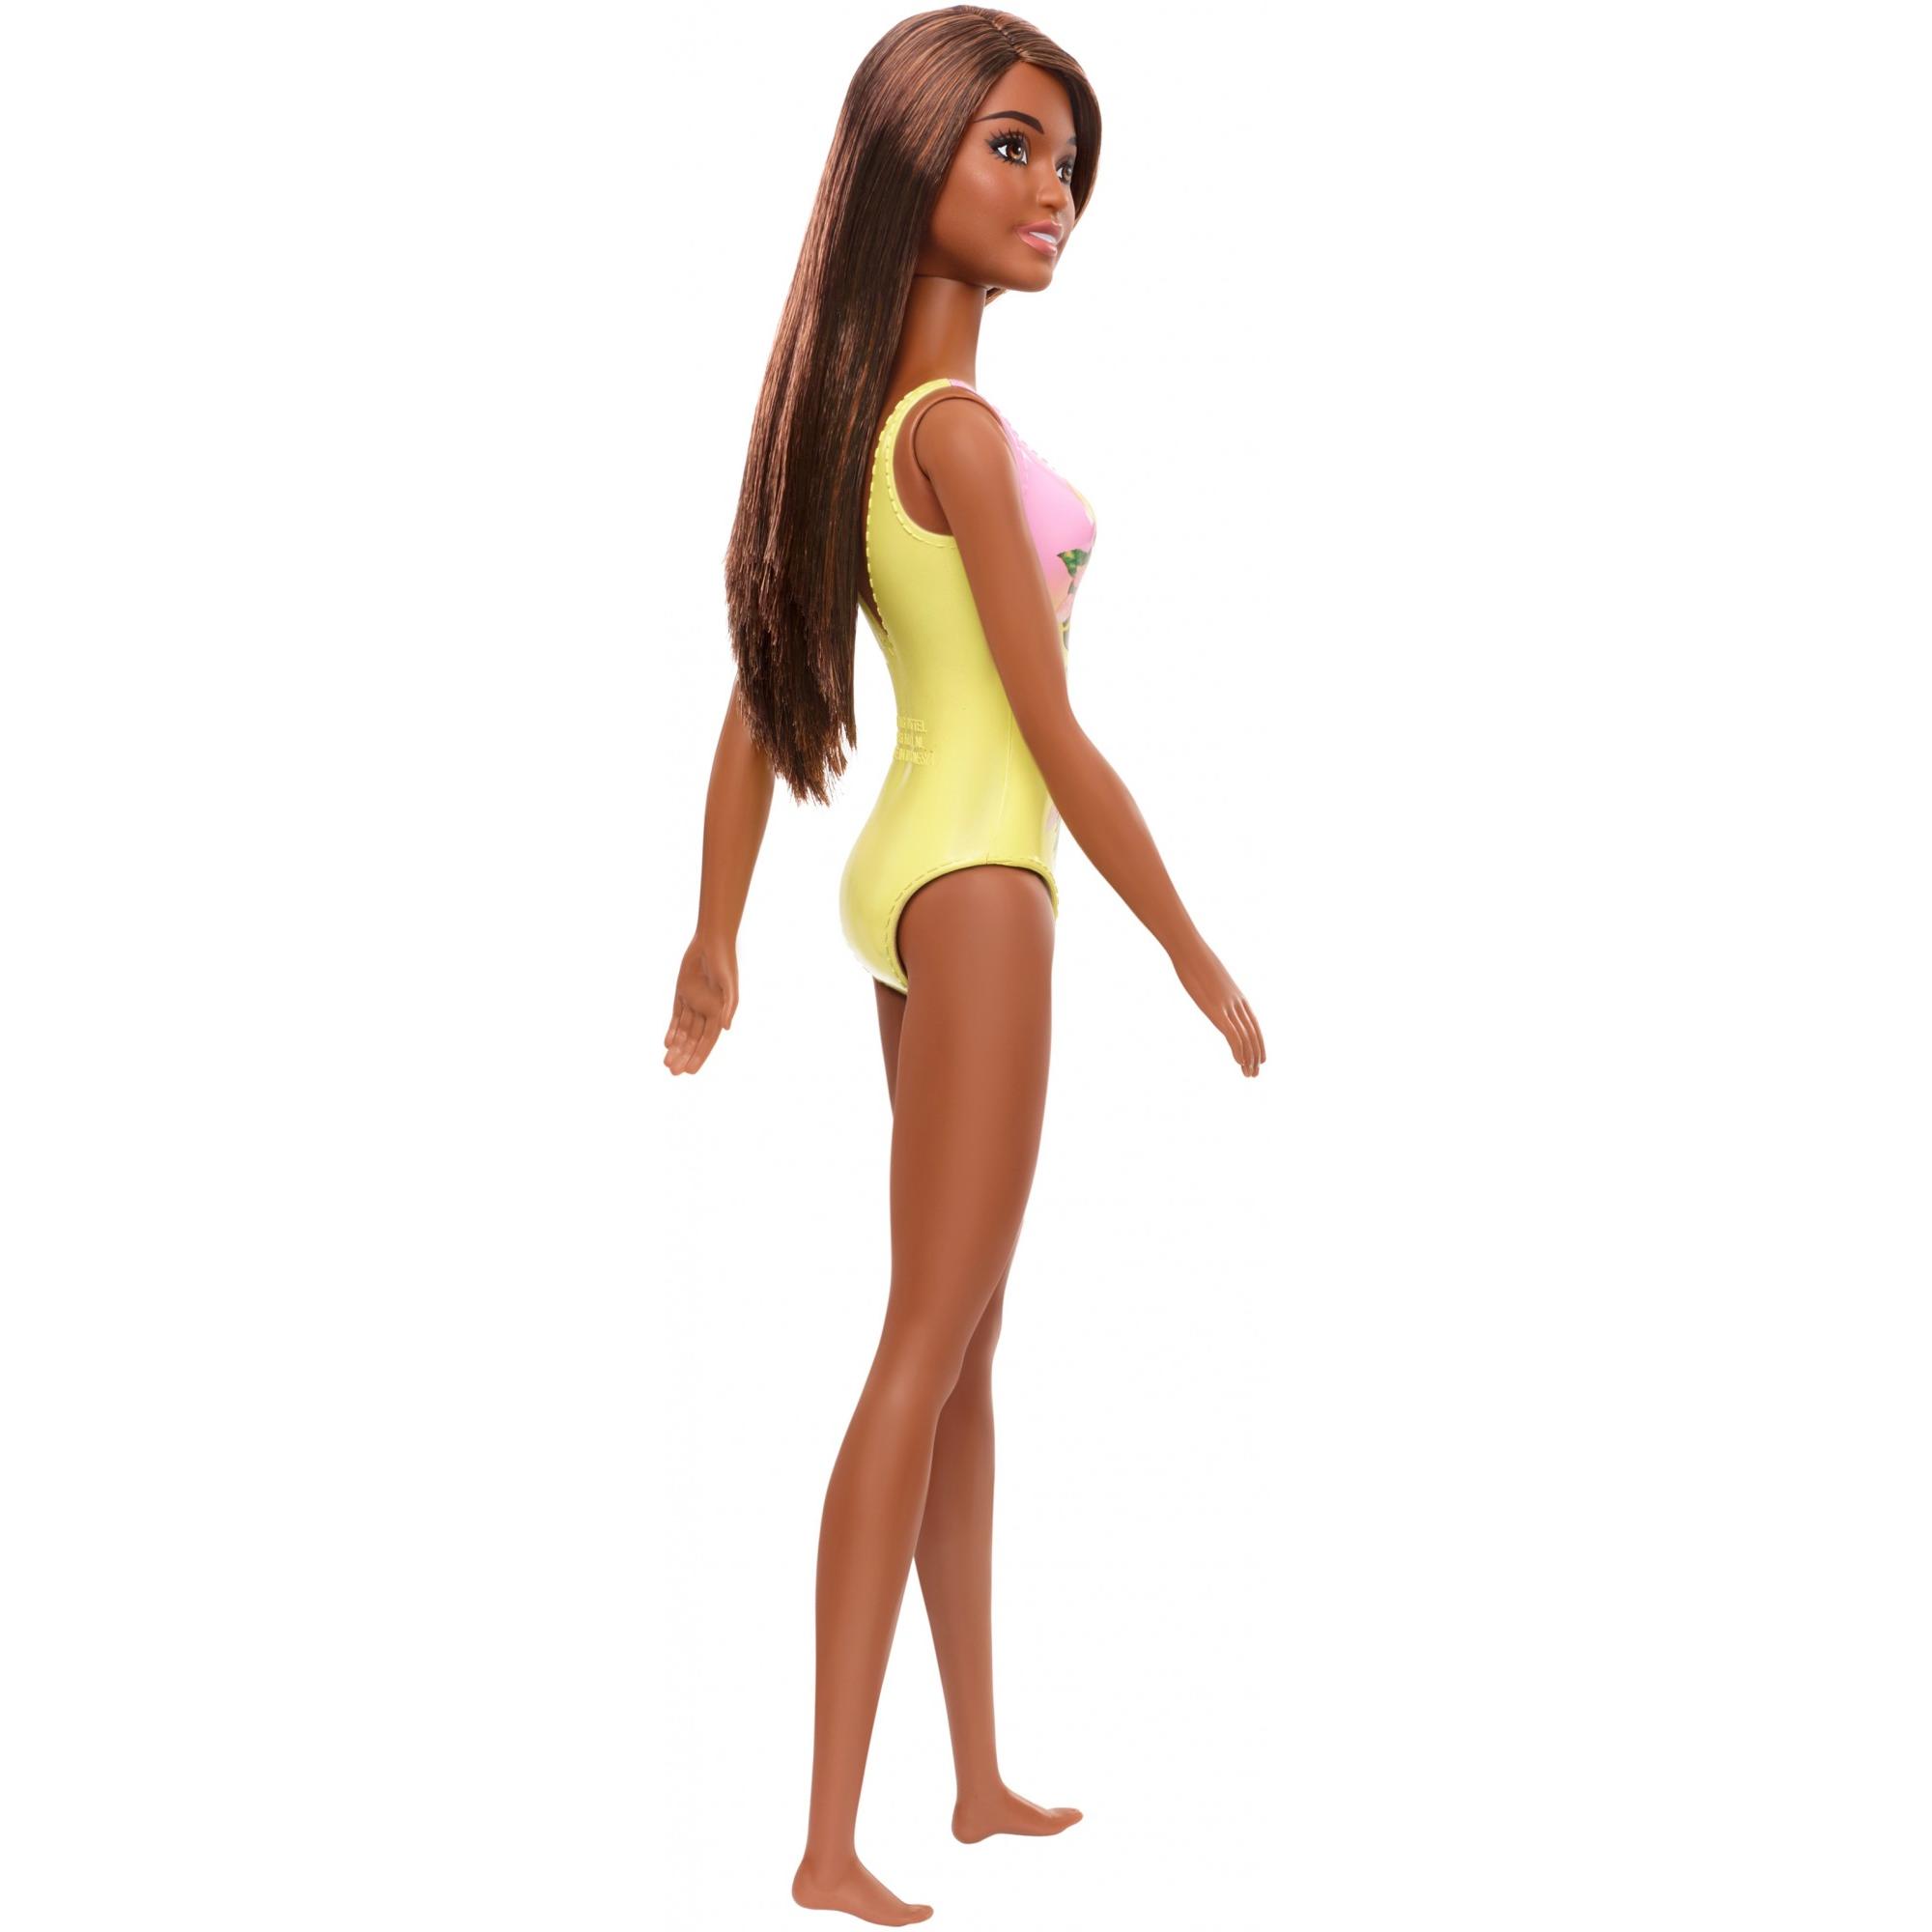 Barbie Swimsuit Beach Doll with Brown Hair & Tropical Floral Print Suit - image 5 of 6